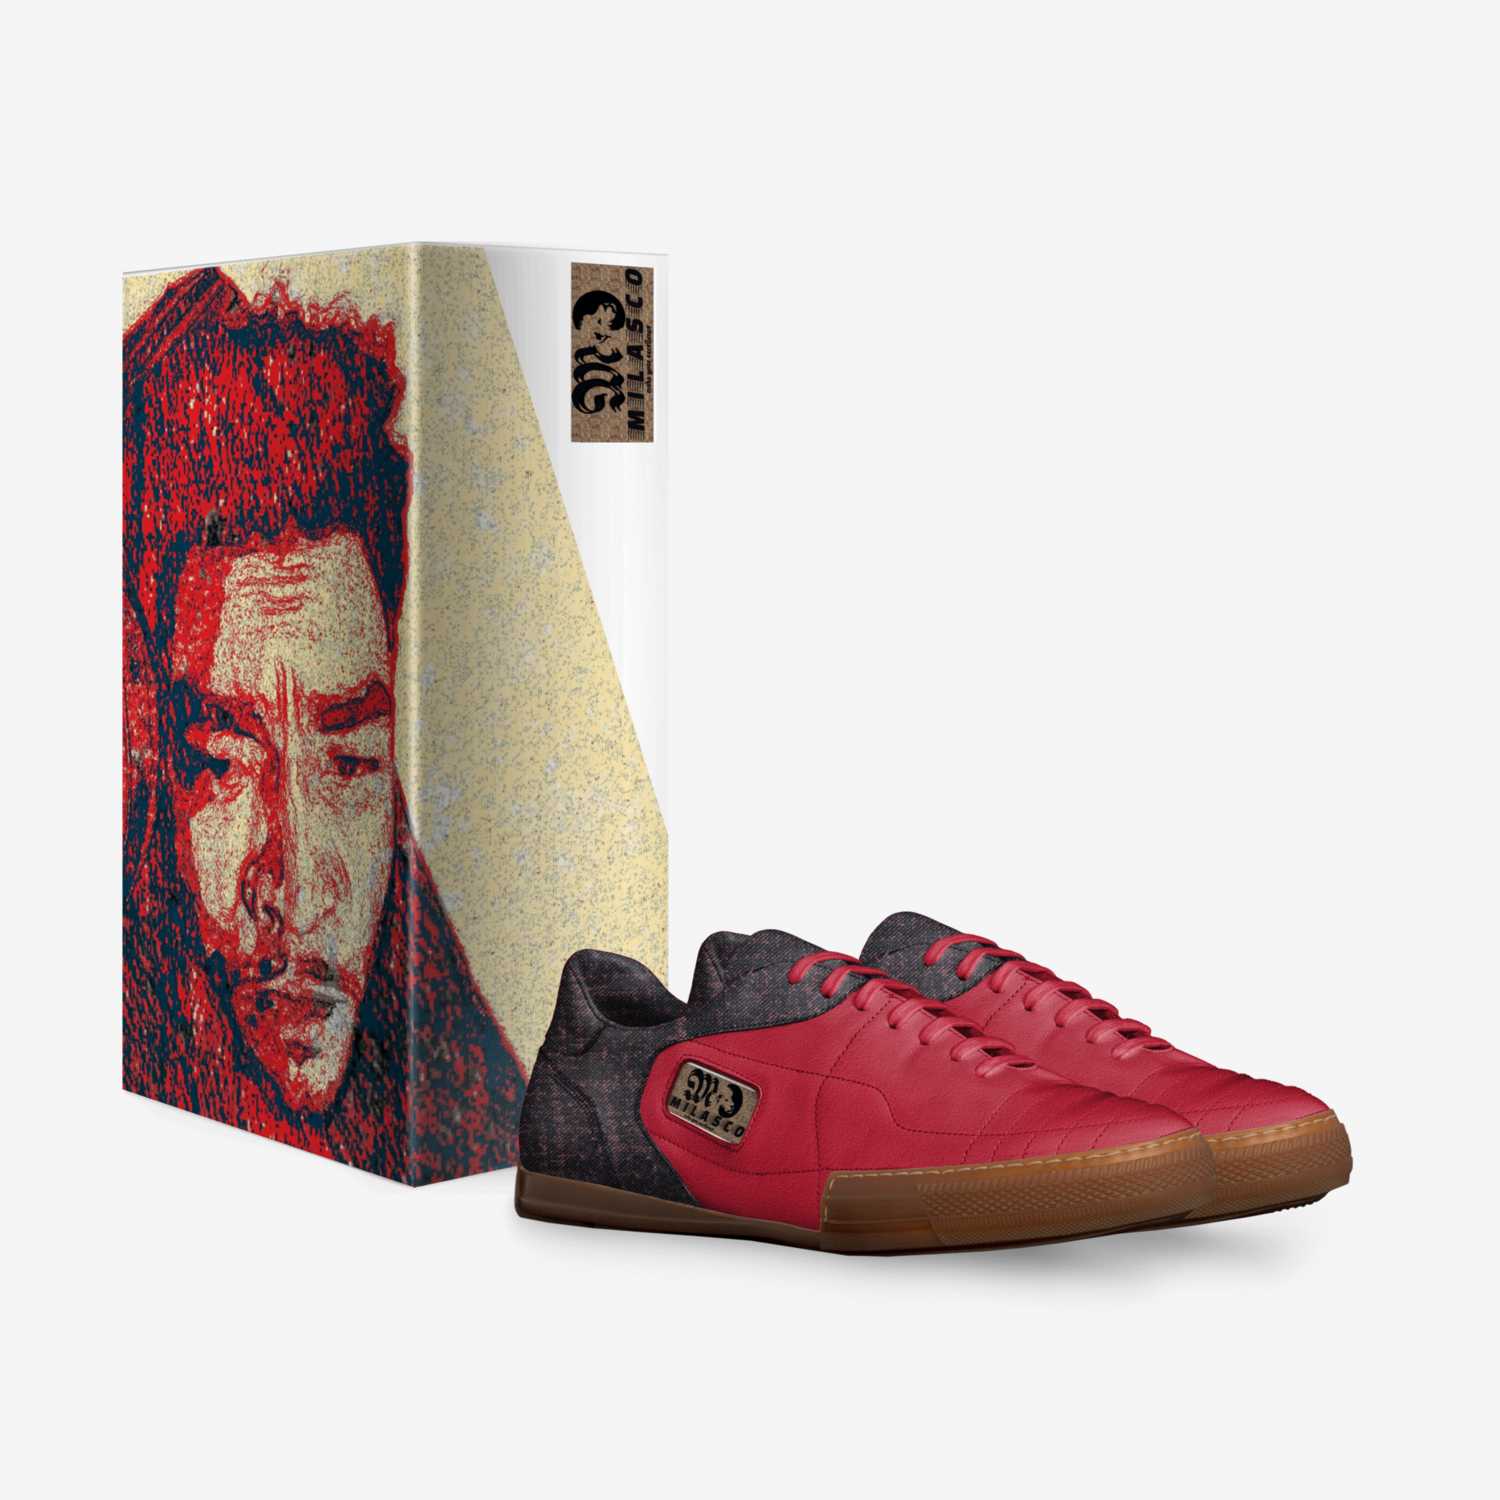 MILASCO Redboi custom made in Italy shoes by Michael Scott | Box view